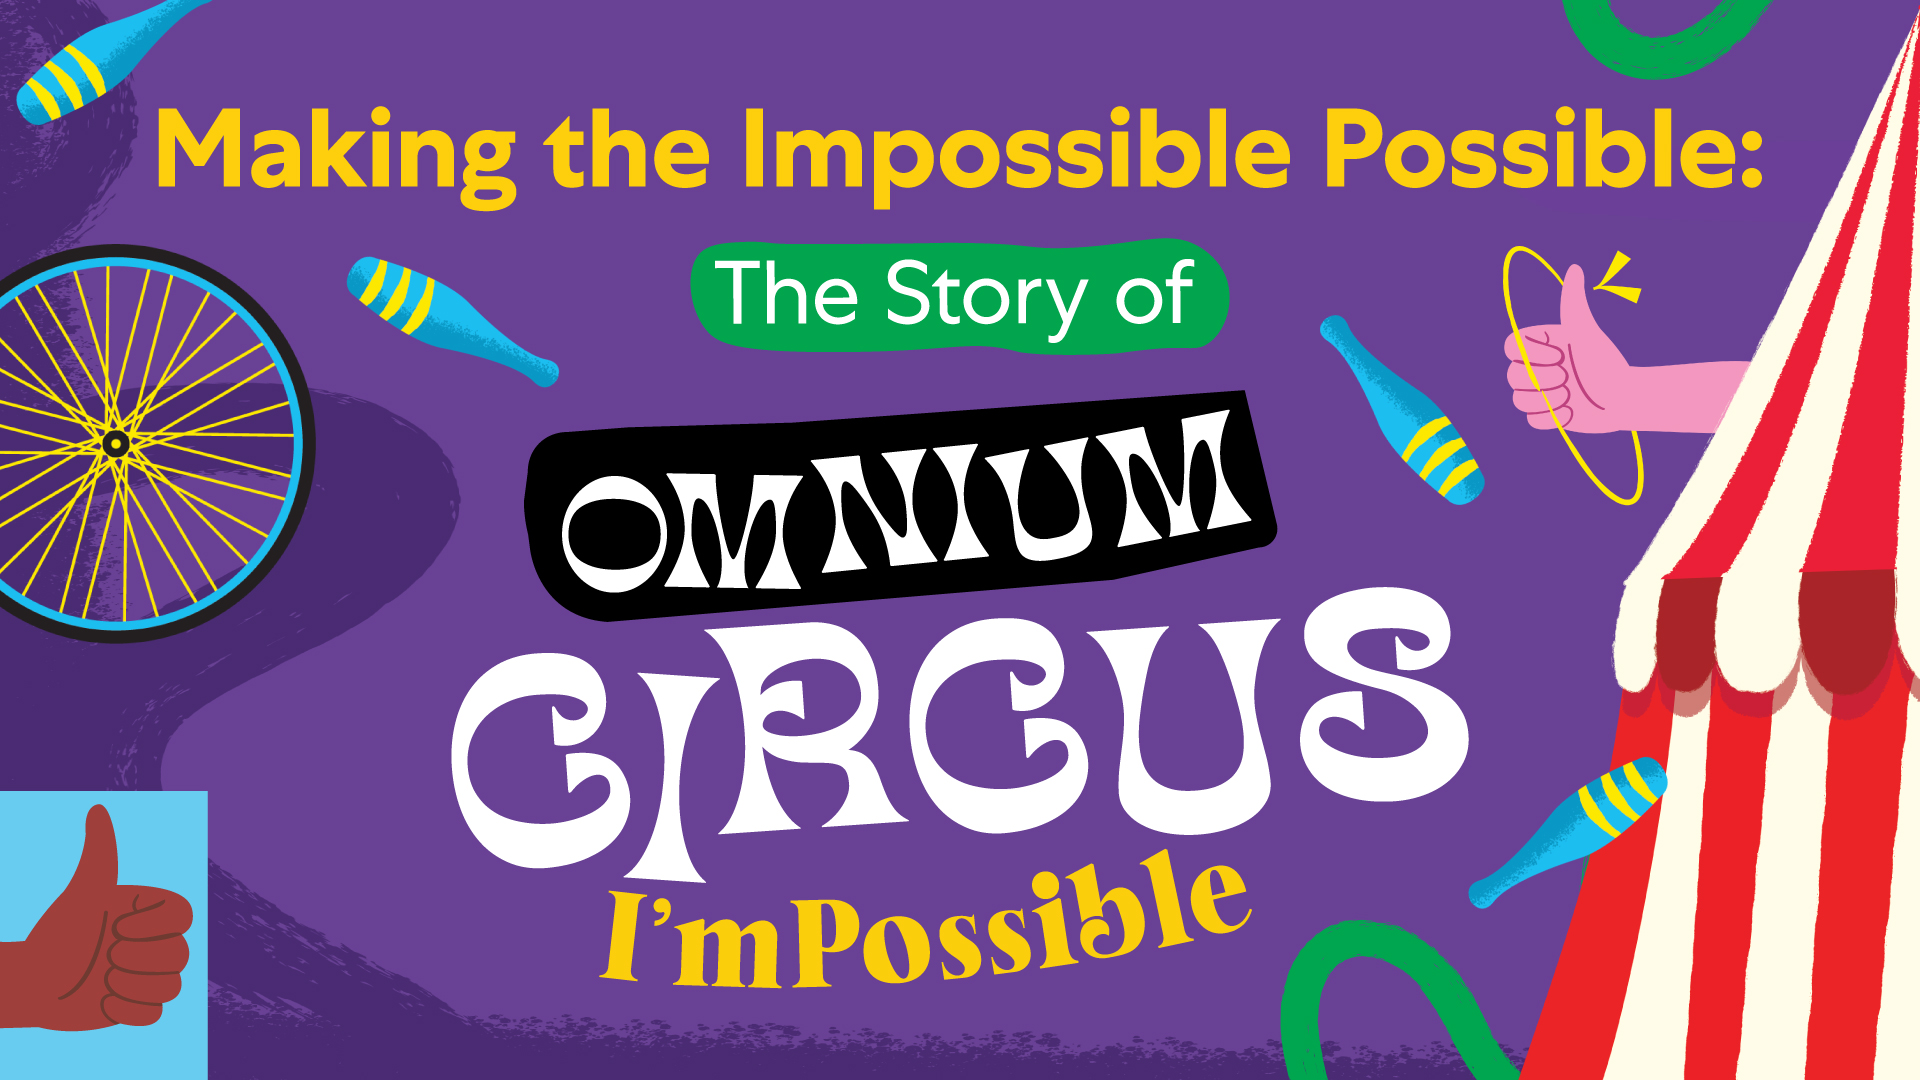 Header image with circus imagery and title of the blog